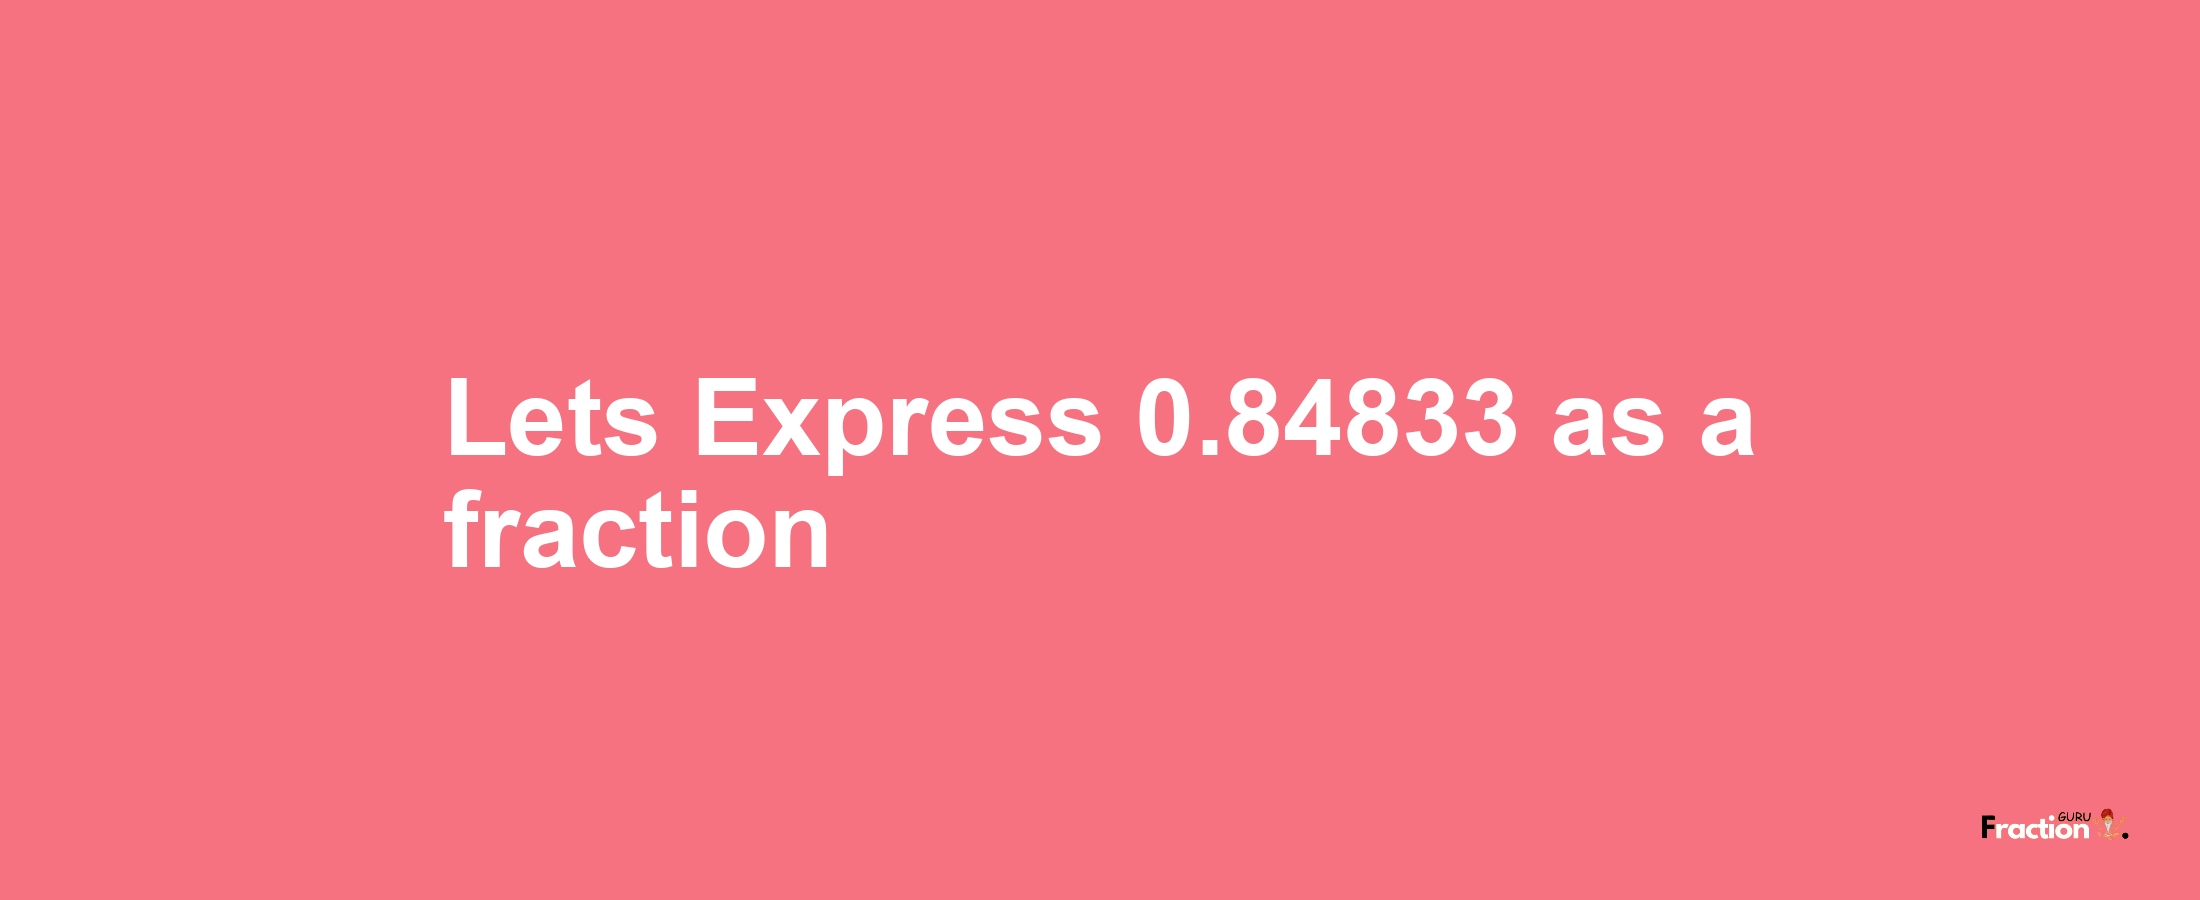 Lets Express 0.84833 as afraction